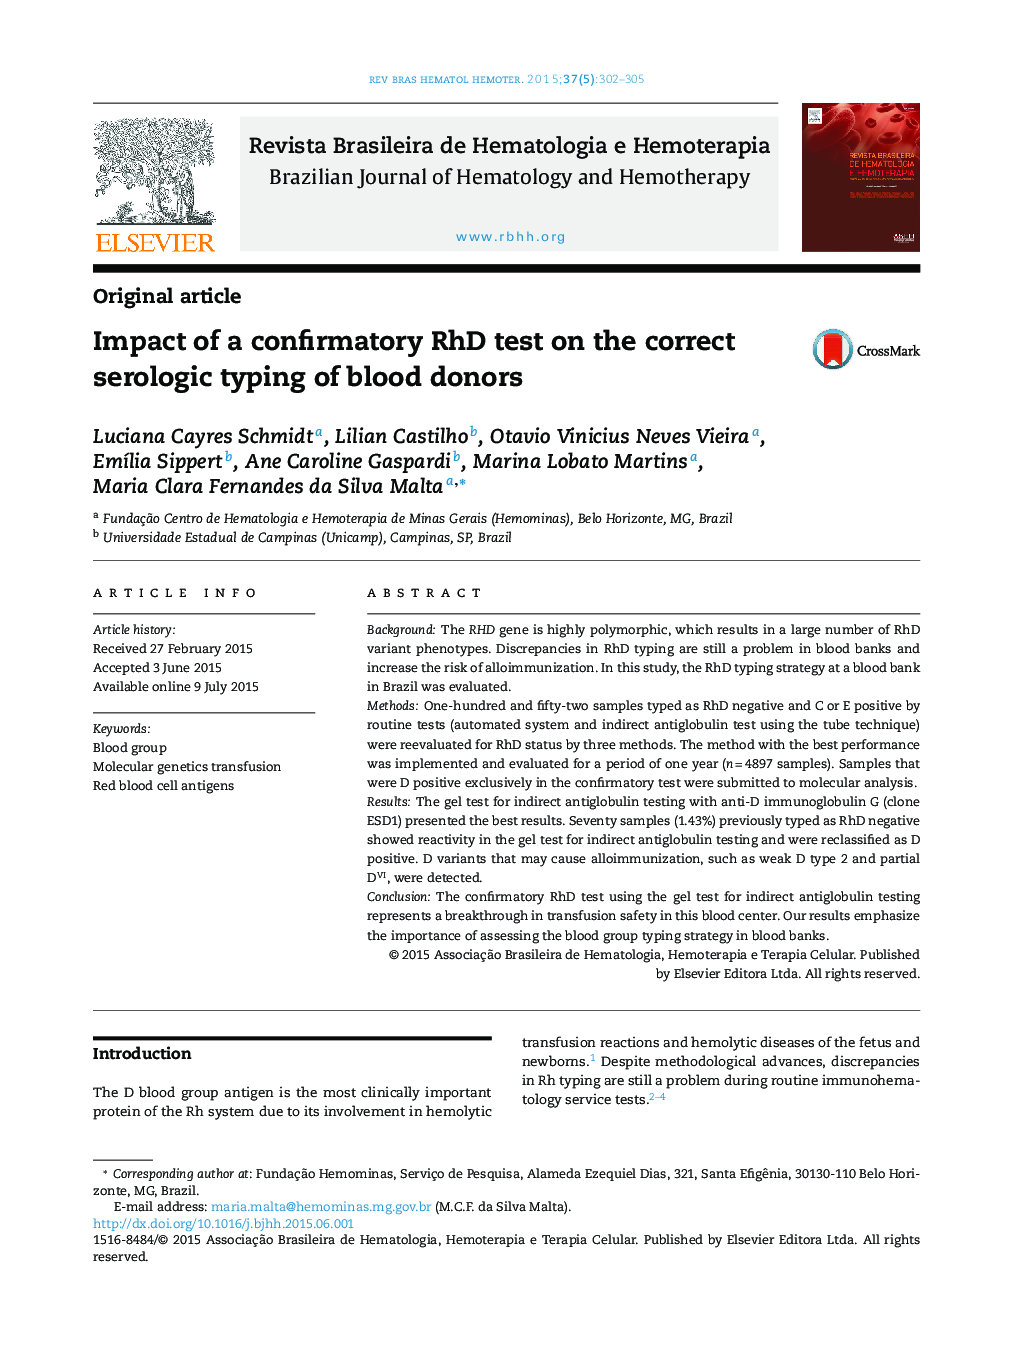 Impact of a confirmatory RhD test on the correct serologic typing of blood donors